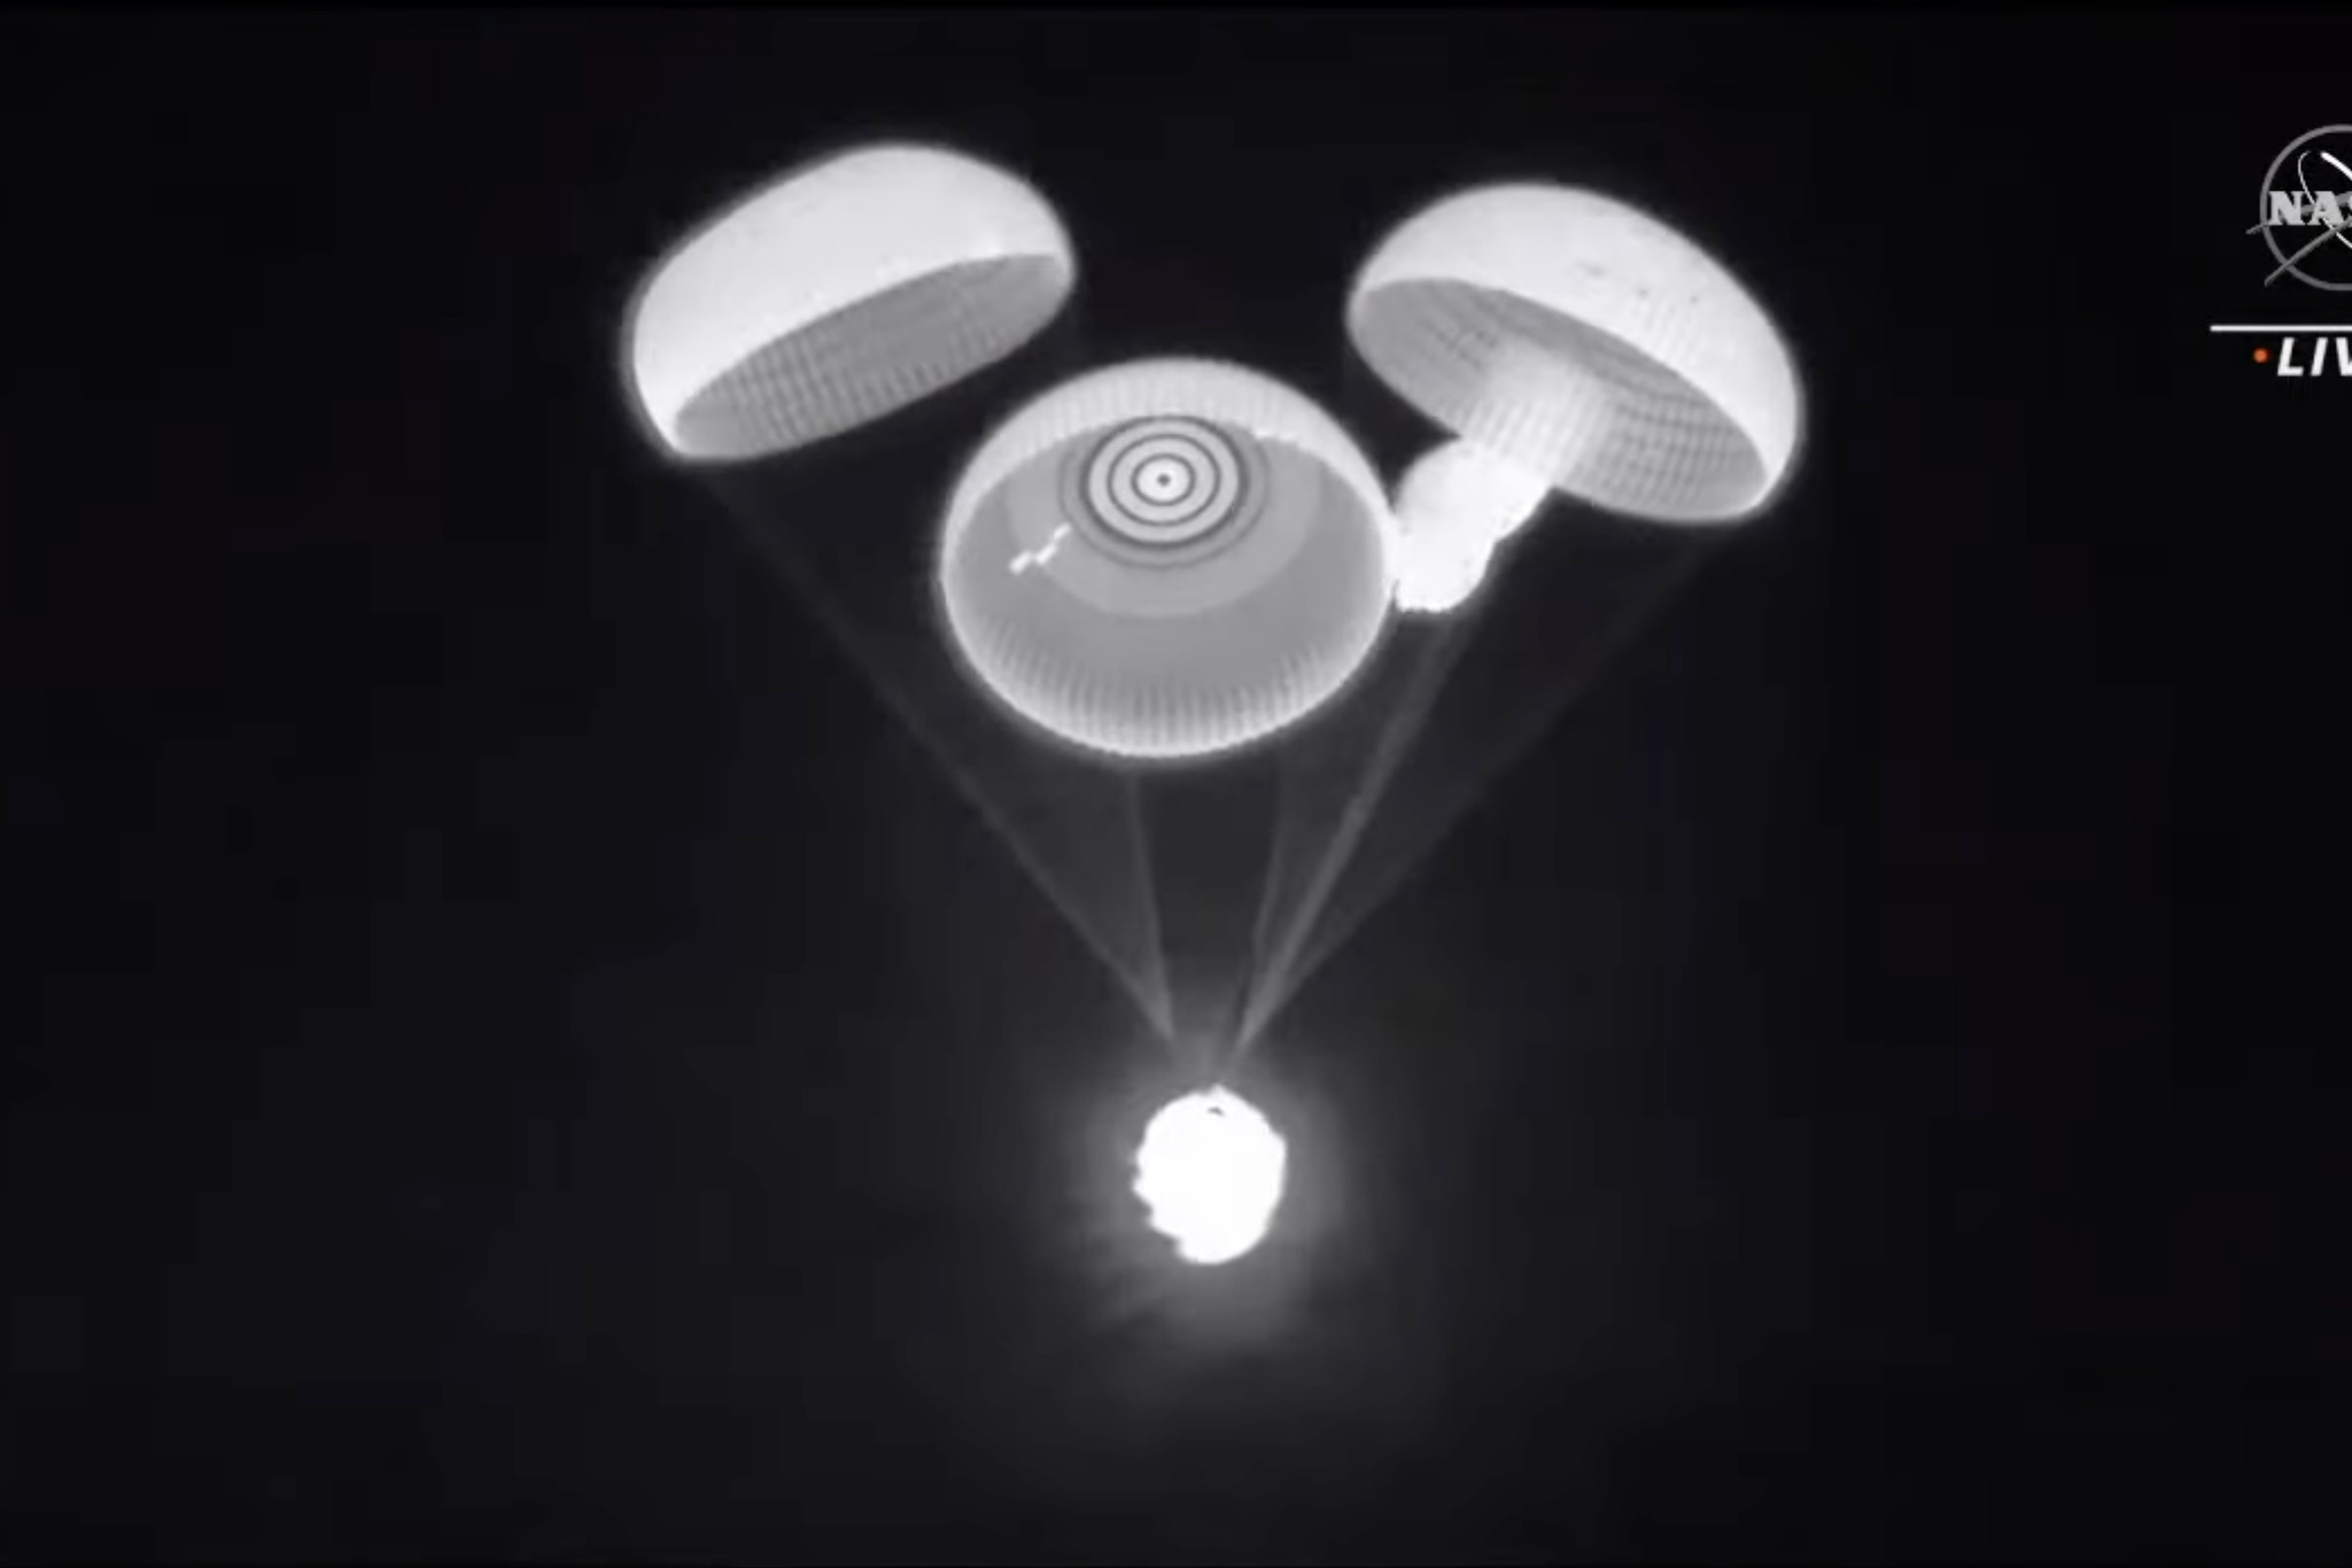 A screengrab of the livestream during the Crew-2 landing, showing the one lagging parachute